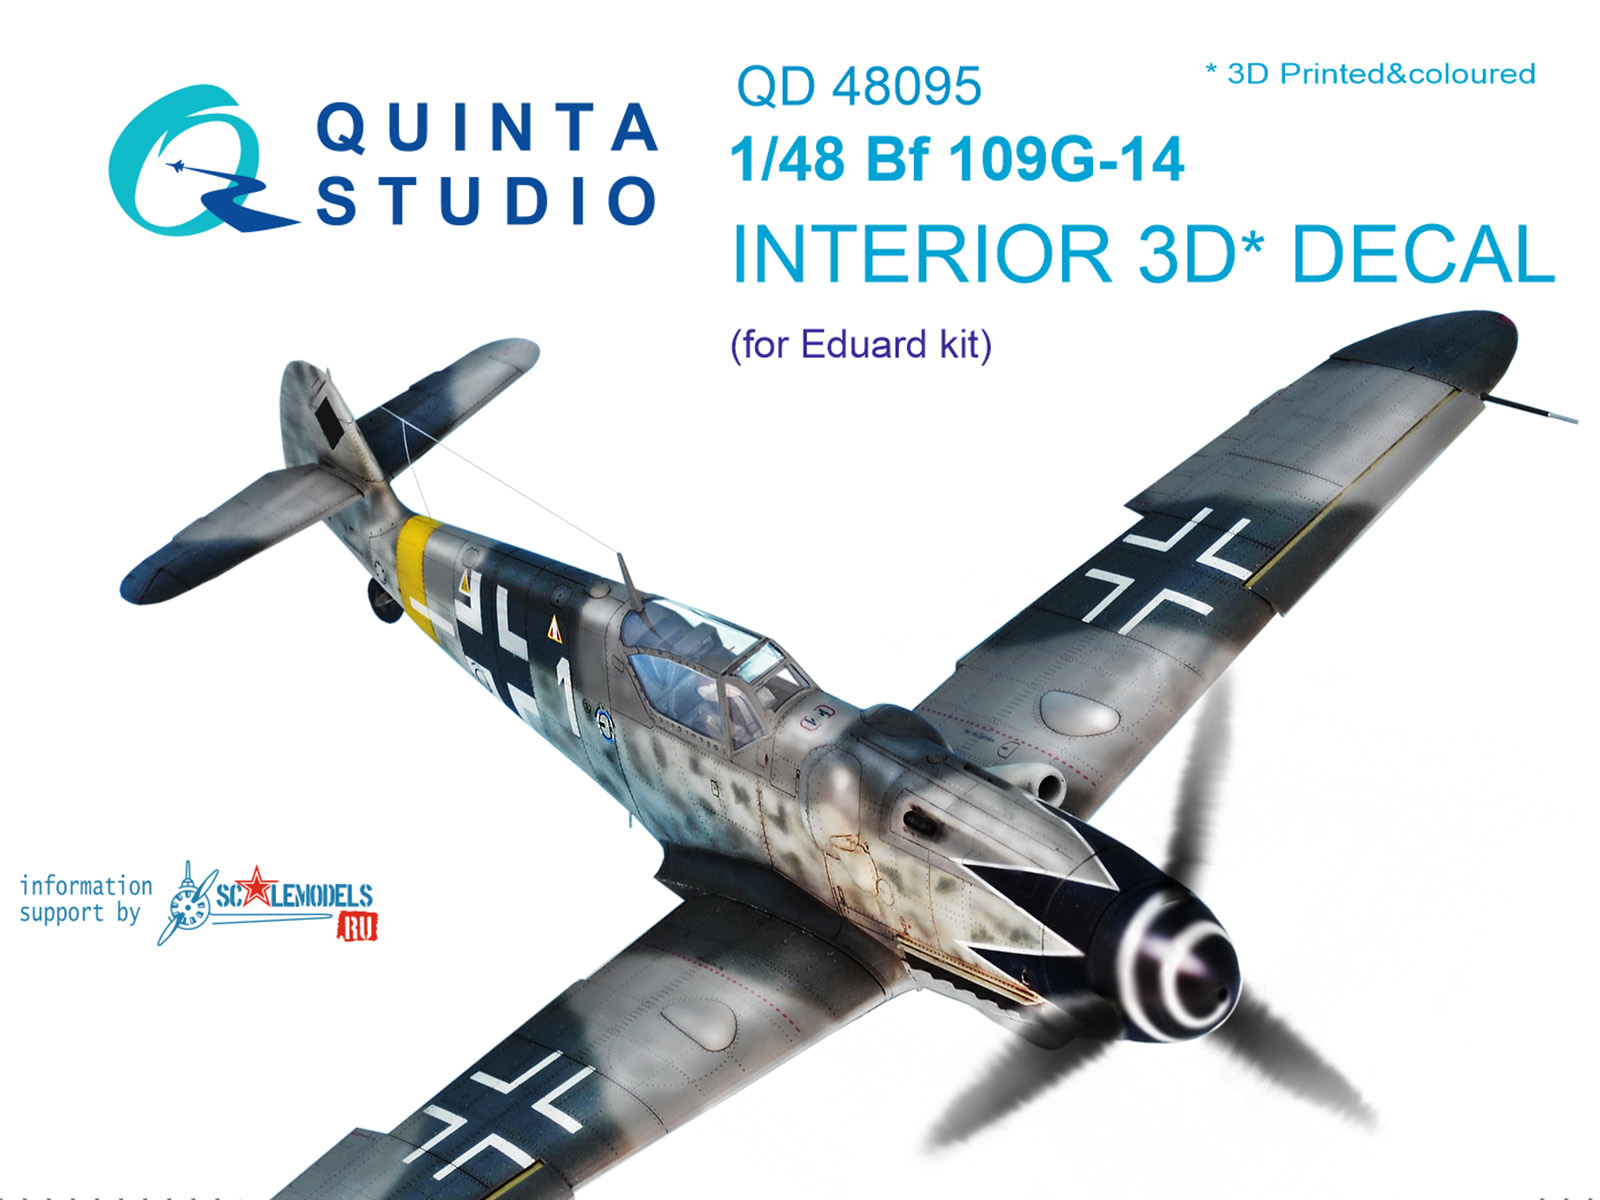  Bf 109G-14 3D-Printed & coloured Interior on decal paper (for Eduard  kit)